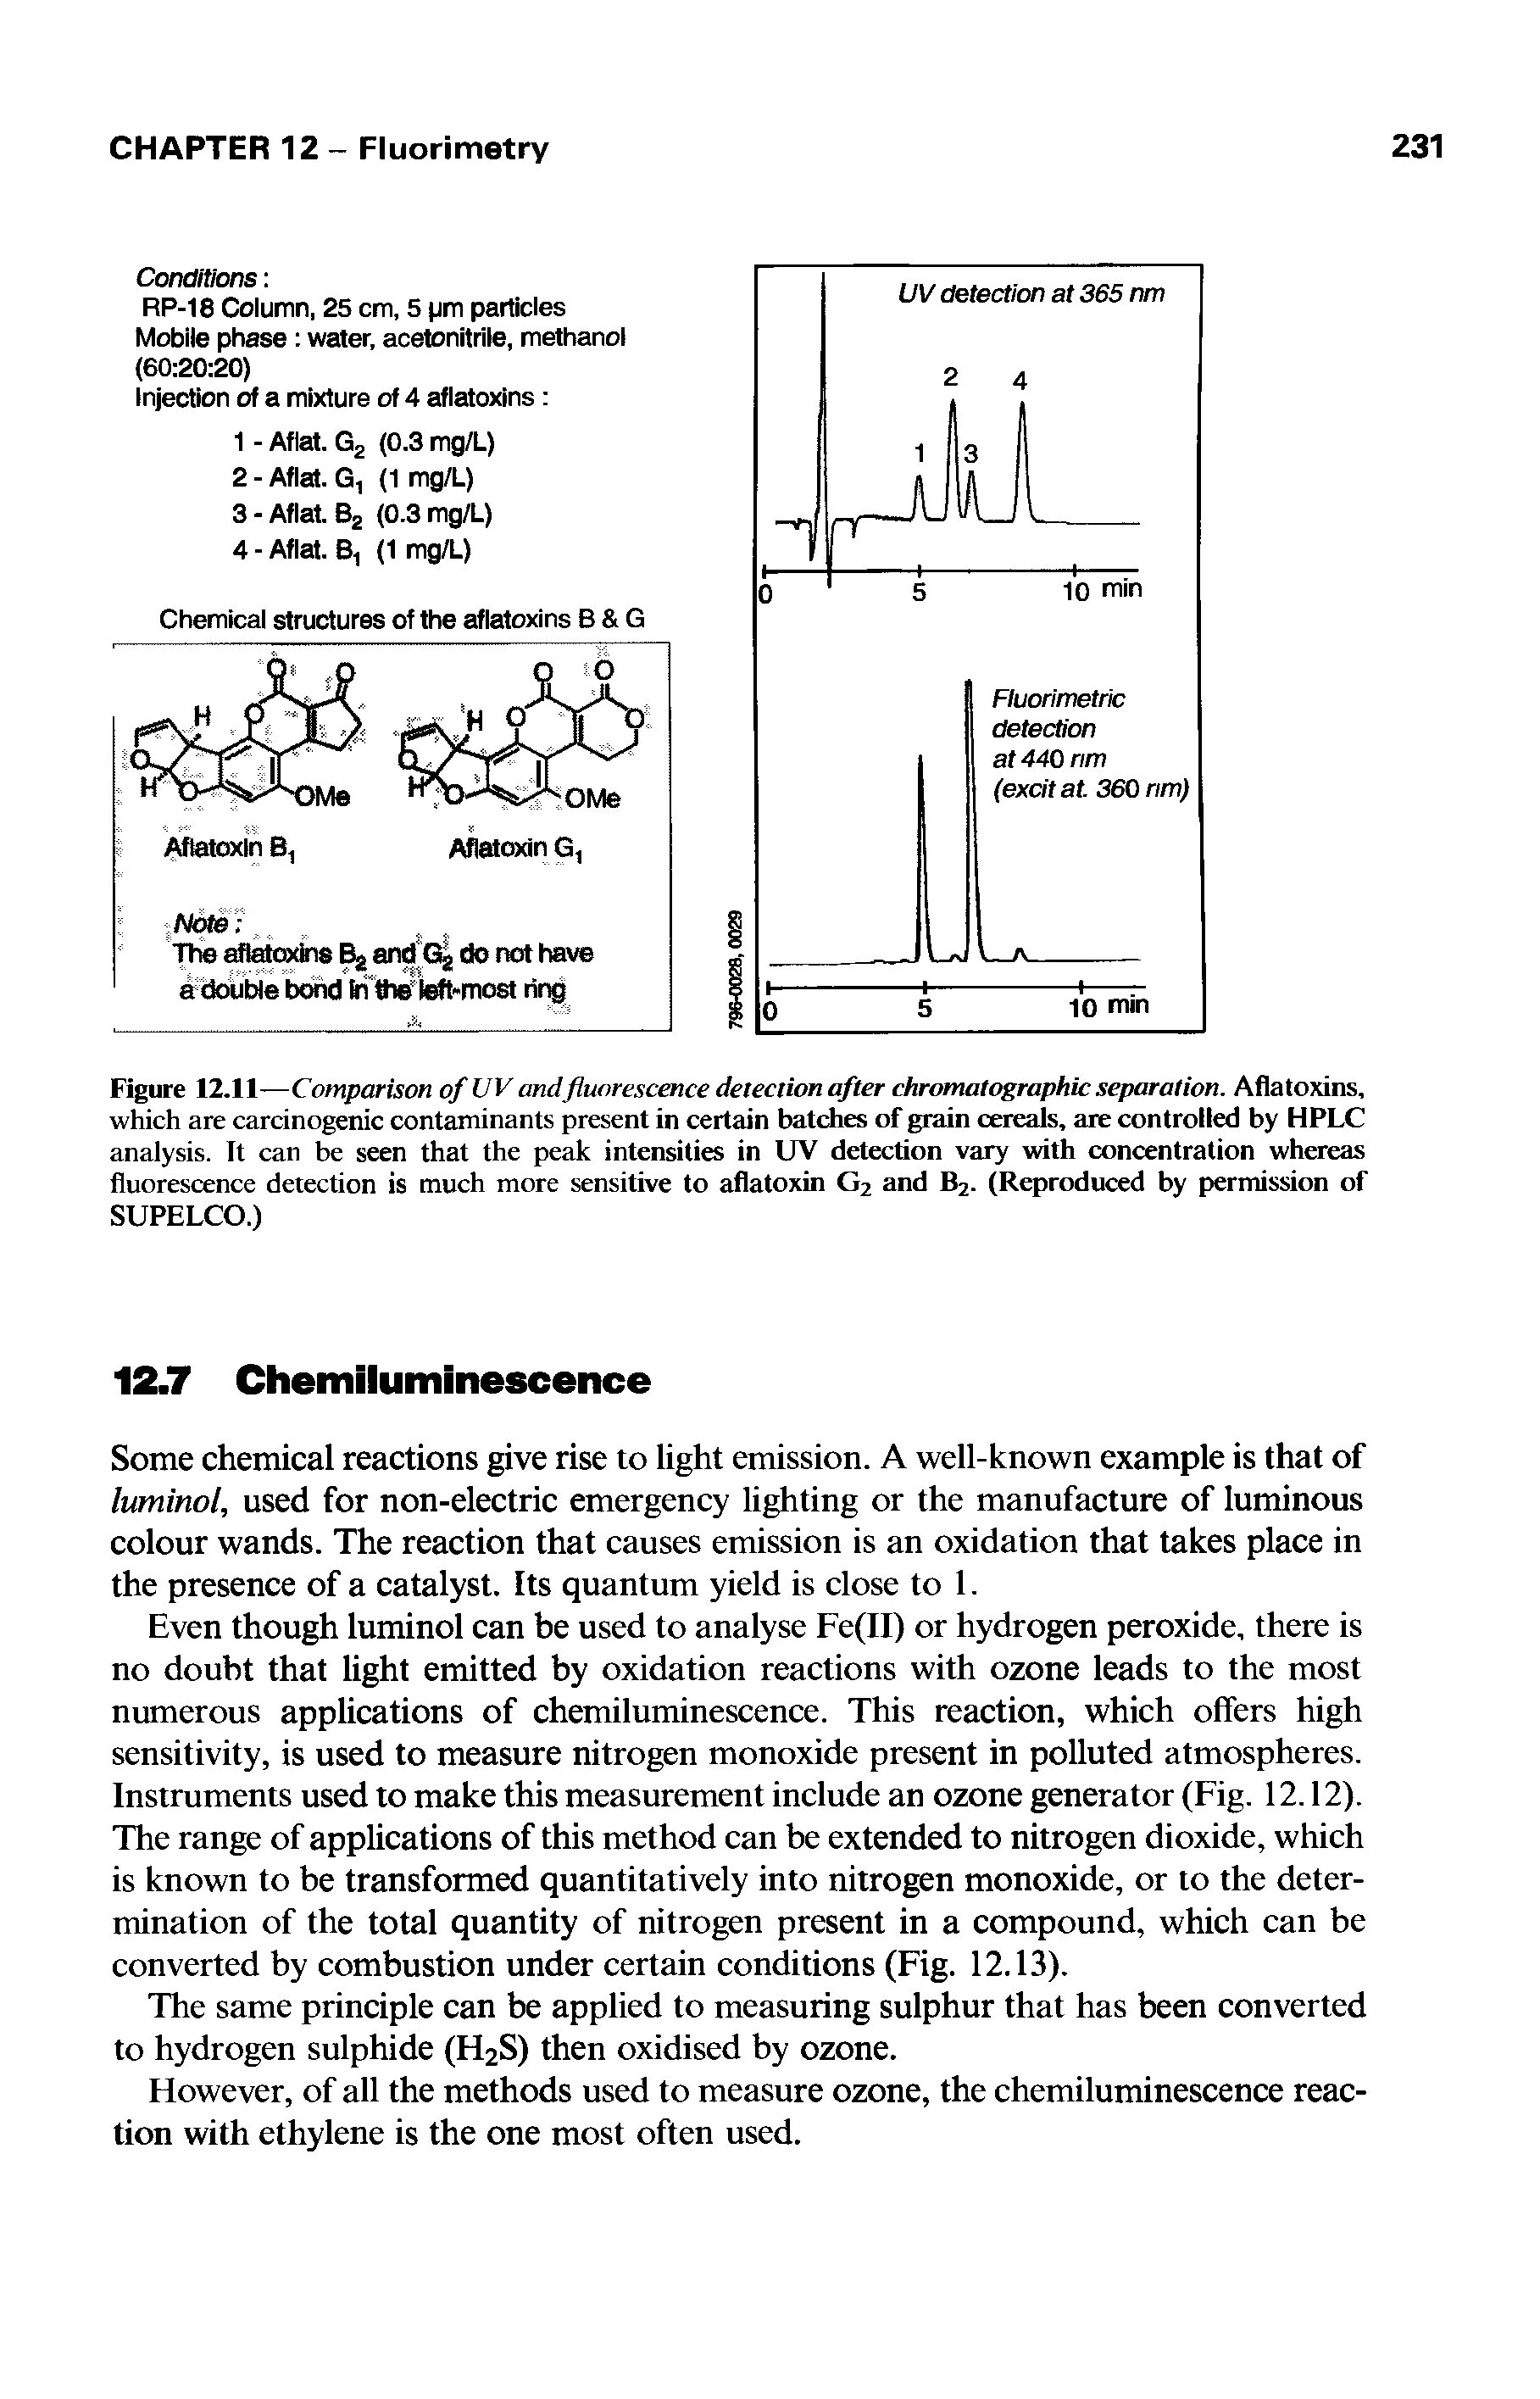 Figure 12.11—Comparison of UV andfluorescence detection after chromatographic separation. Aflatoxins, which are carcinogenic contaminants present in certain batches of grain cereals, are controlled by HPLC analysis. It can be seen that the peak intensities in UV detection vary with concentration whereas fluorescence detection is much more sensitive to aflatoxin G2 and B2. (Reproduced by permission of SUPELCO.)...